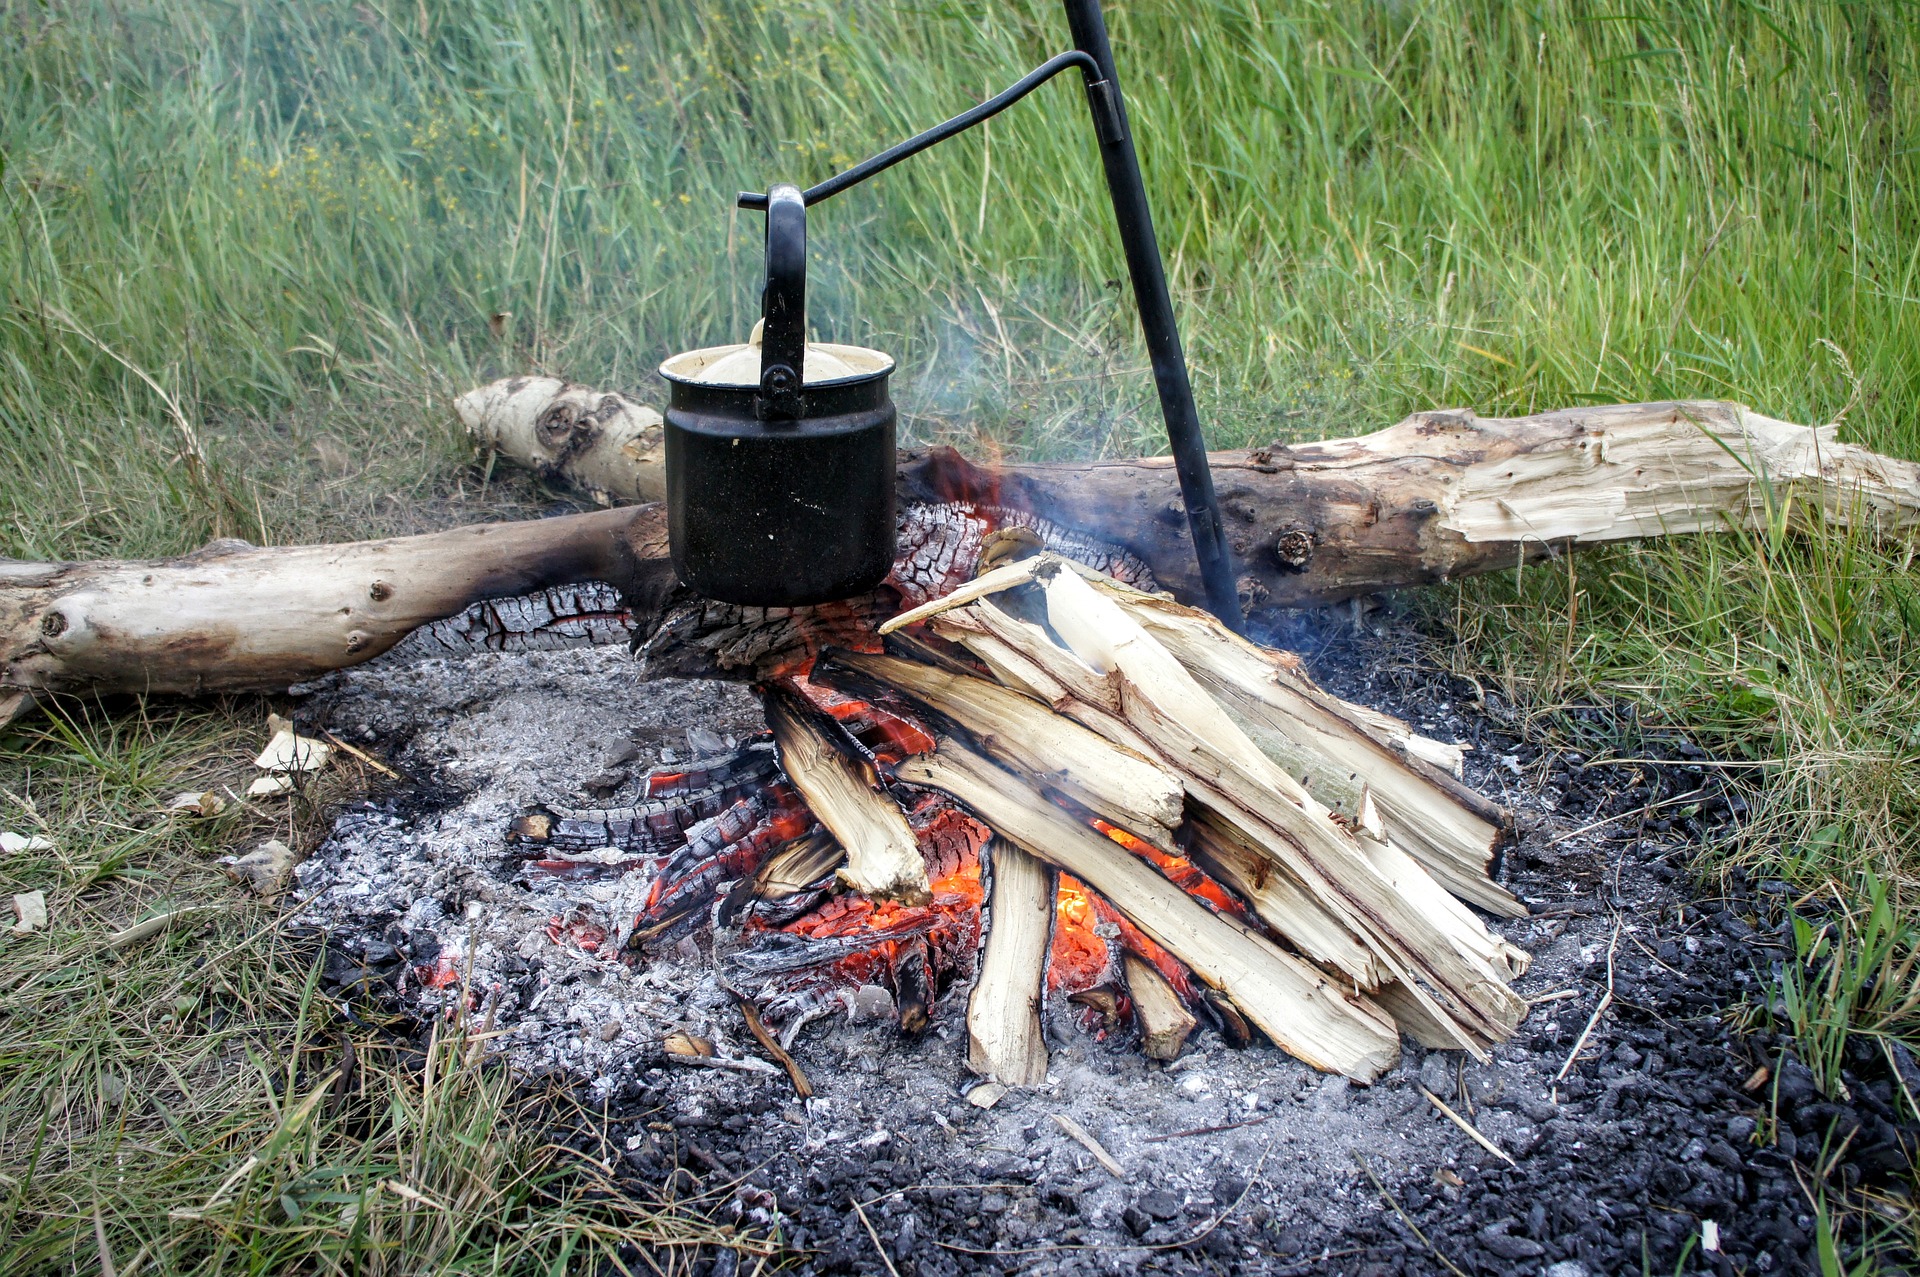 cooking food on an open fire